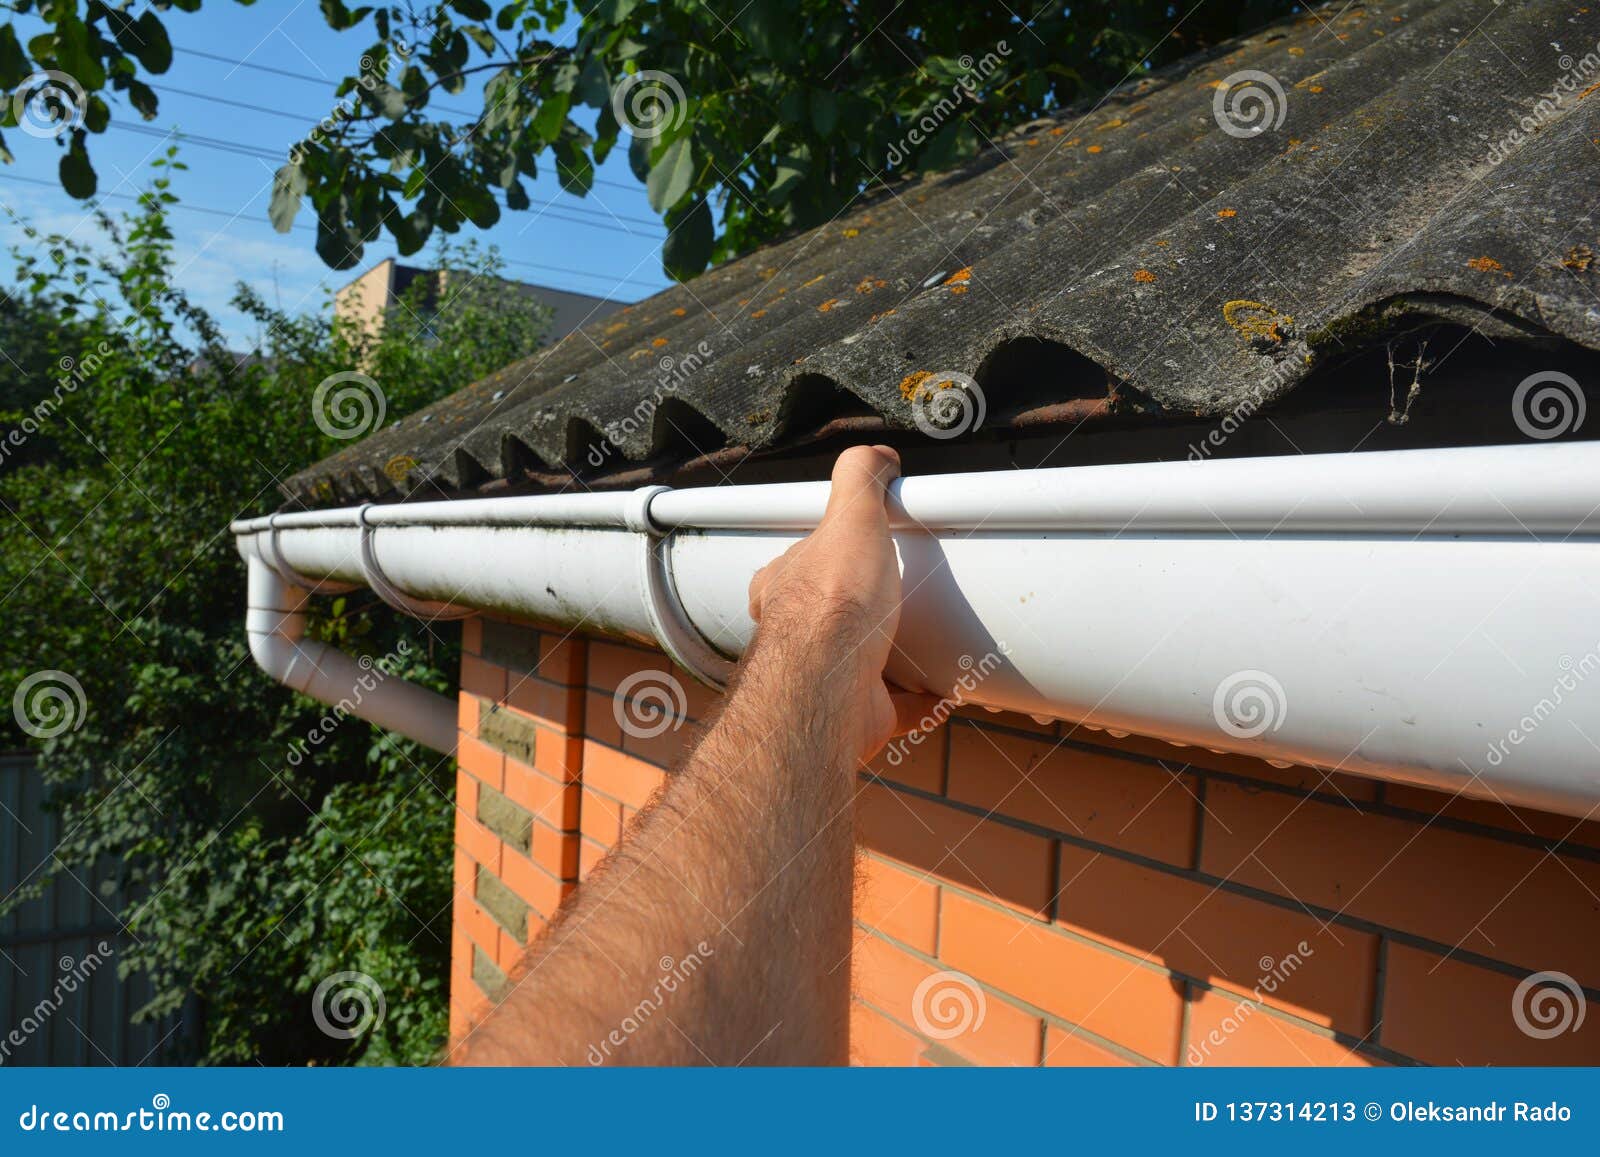 roofer repair and renovate roof gutter on old brick house asbestos roof